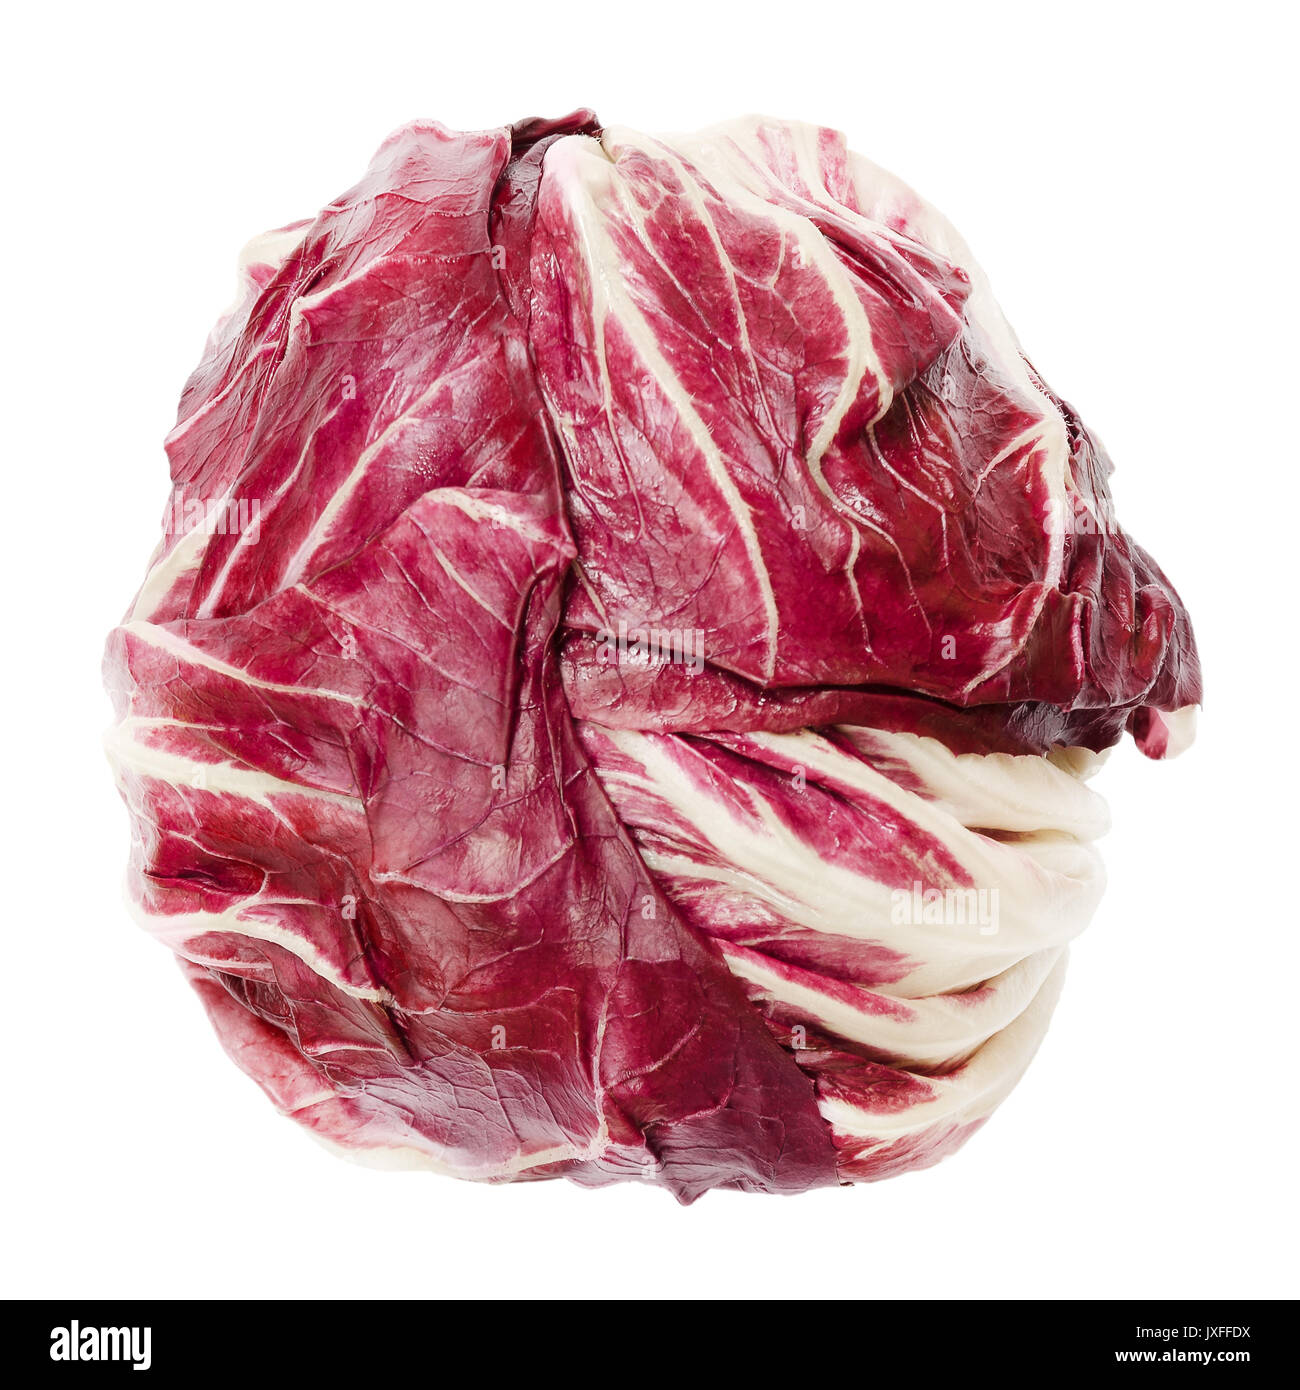 Radicchio from above isolated over white. Italian chicory. Cultivated form of leaf chicory, Cichorium intybus. Leaf vegetable with red leaves. Photo. Stock Photo